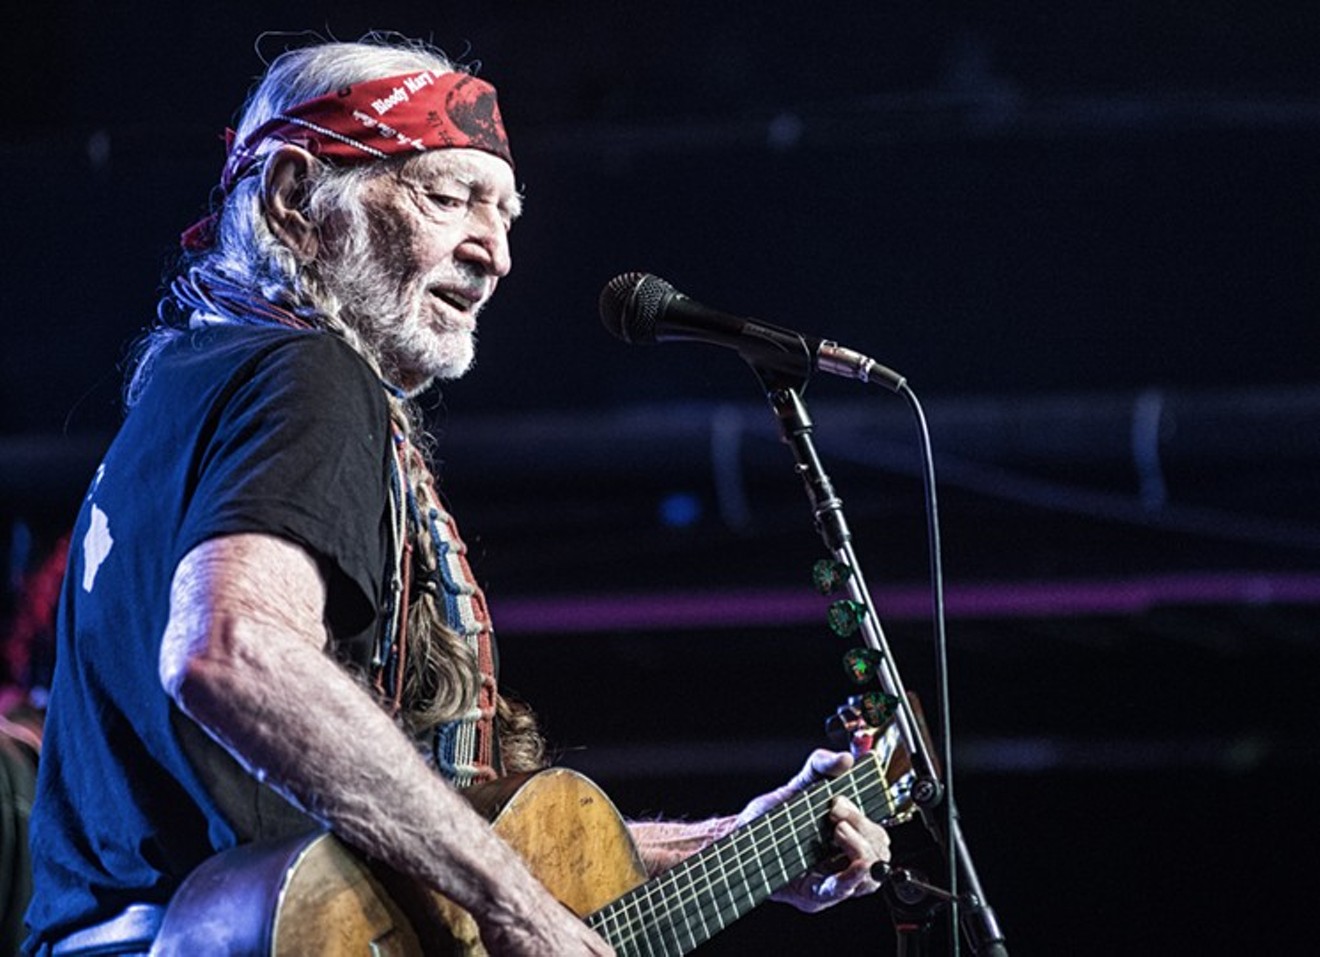 Willie Nelson will be at Dos Equis Pavilion this Wednesday as part of the Outlaw Musc Festival Tour 2019.